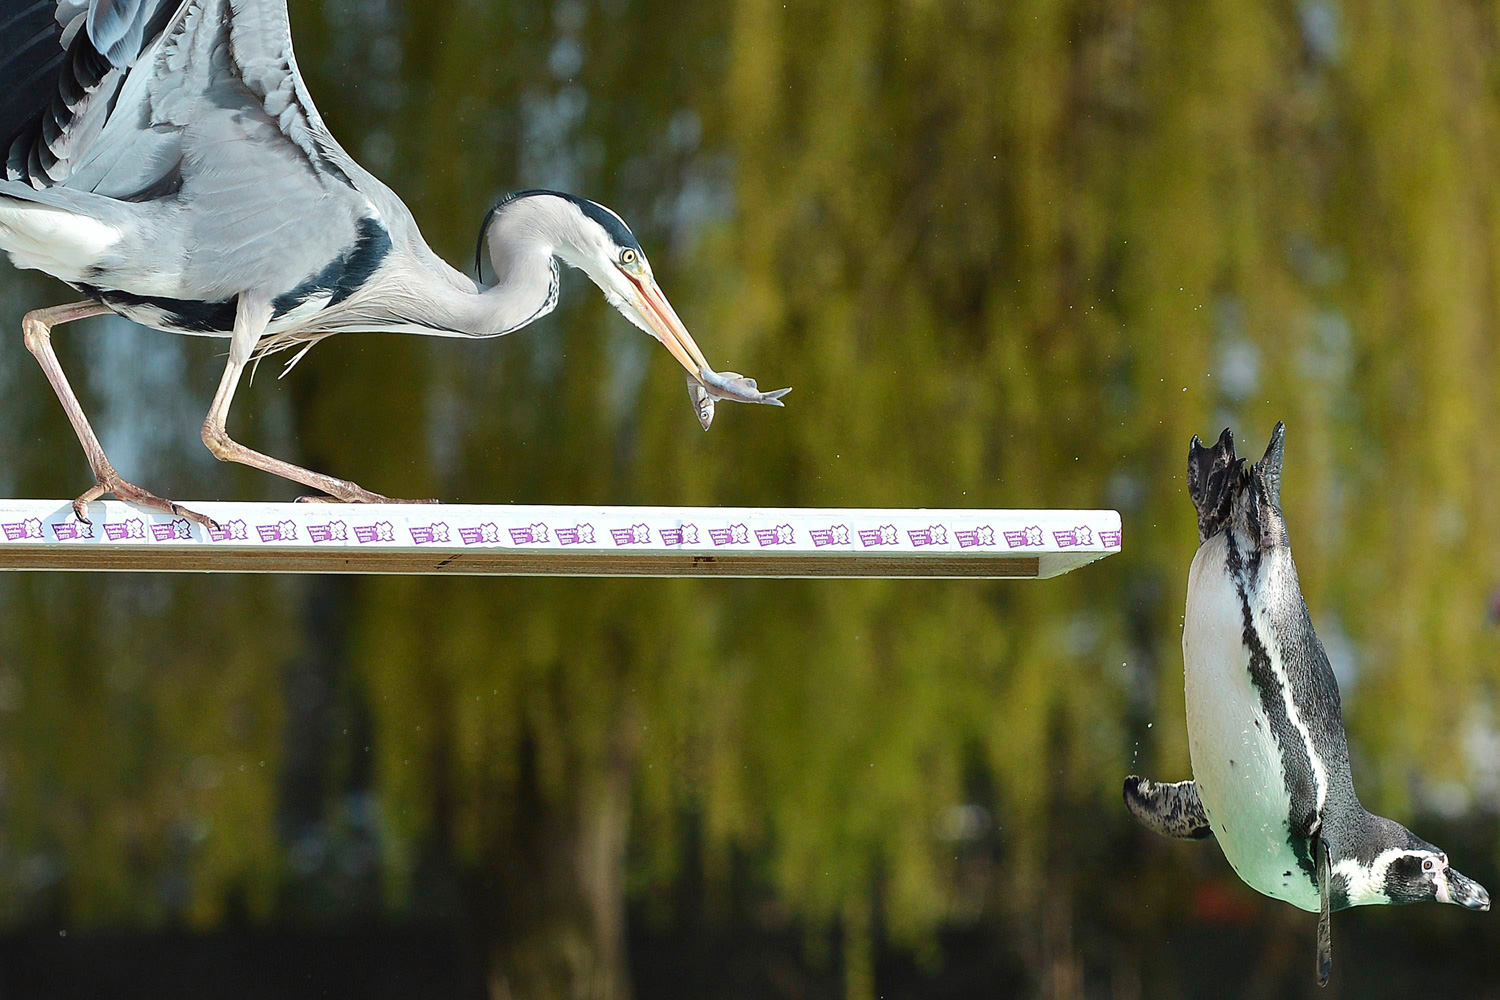 March 29, 2012. A Humboldt Penguin dives off a board as a heron takes a fish at London Zoo in London.